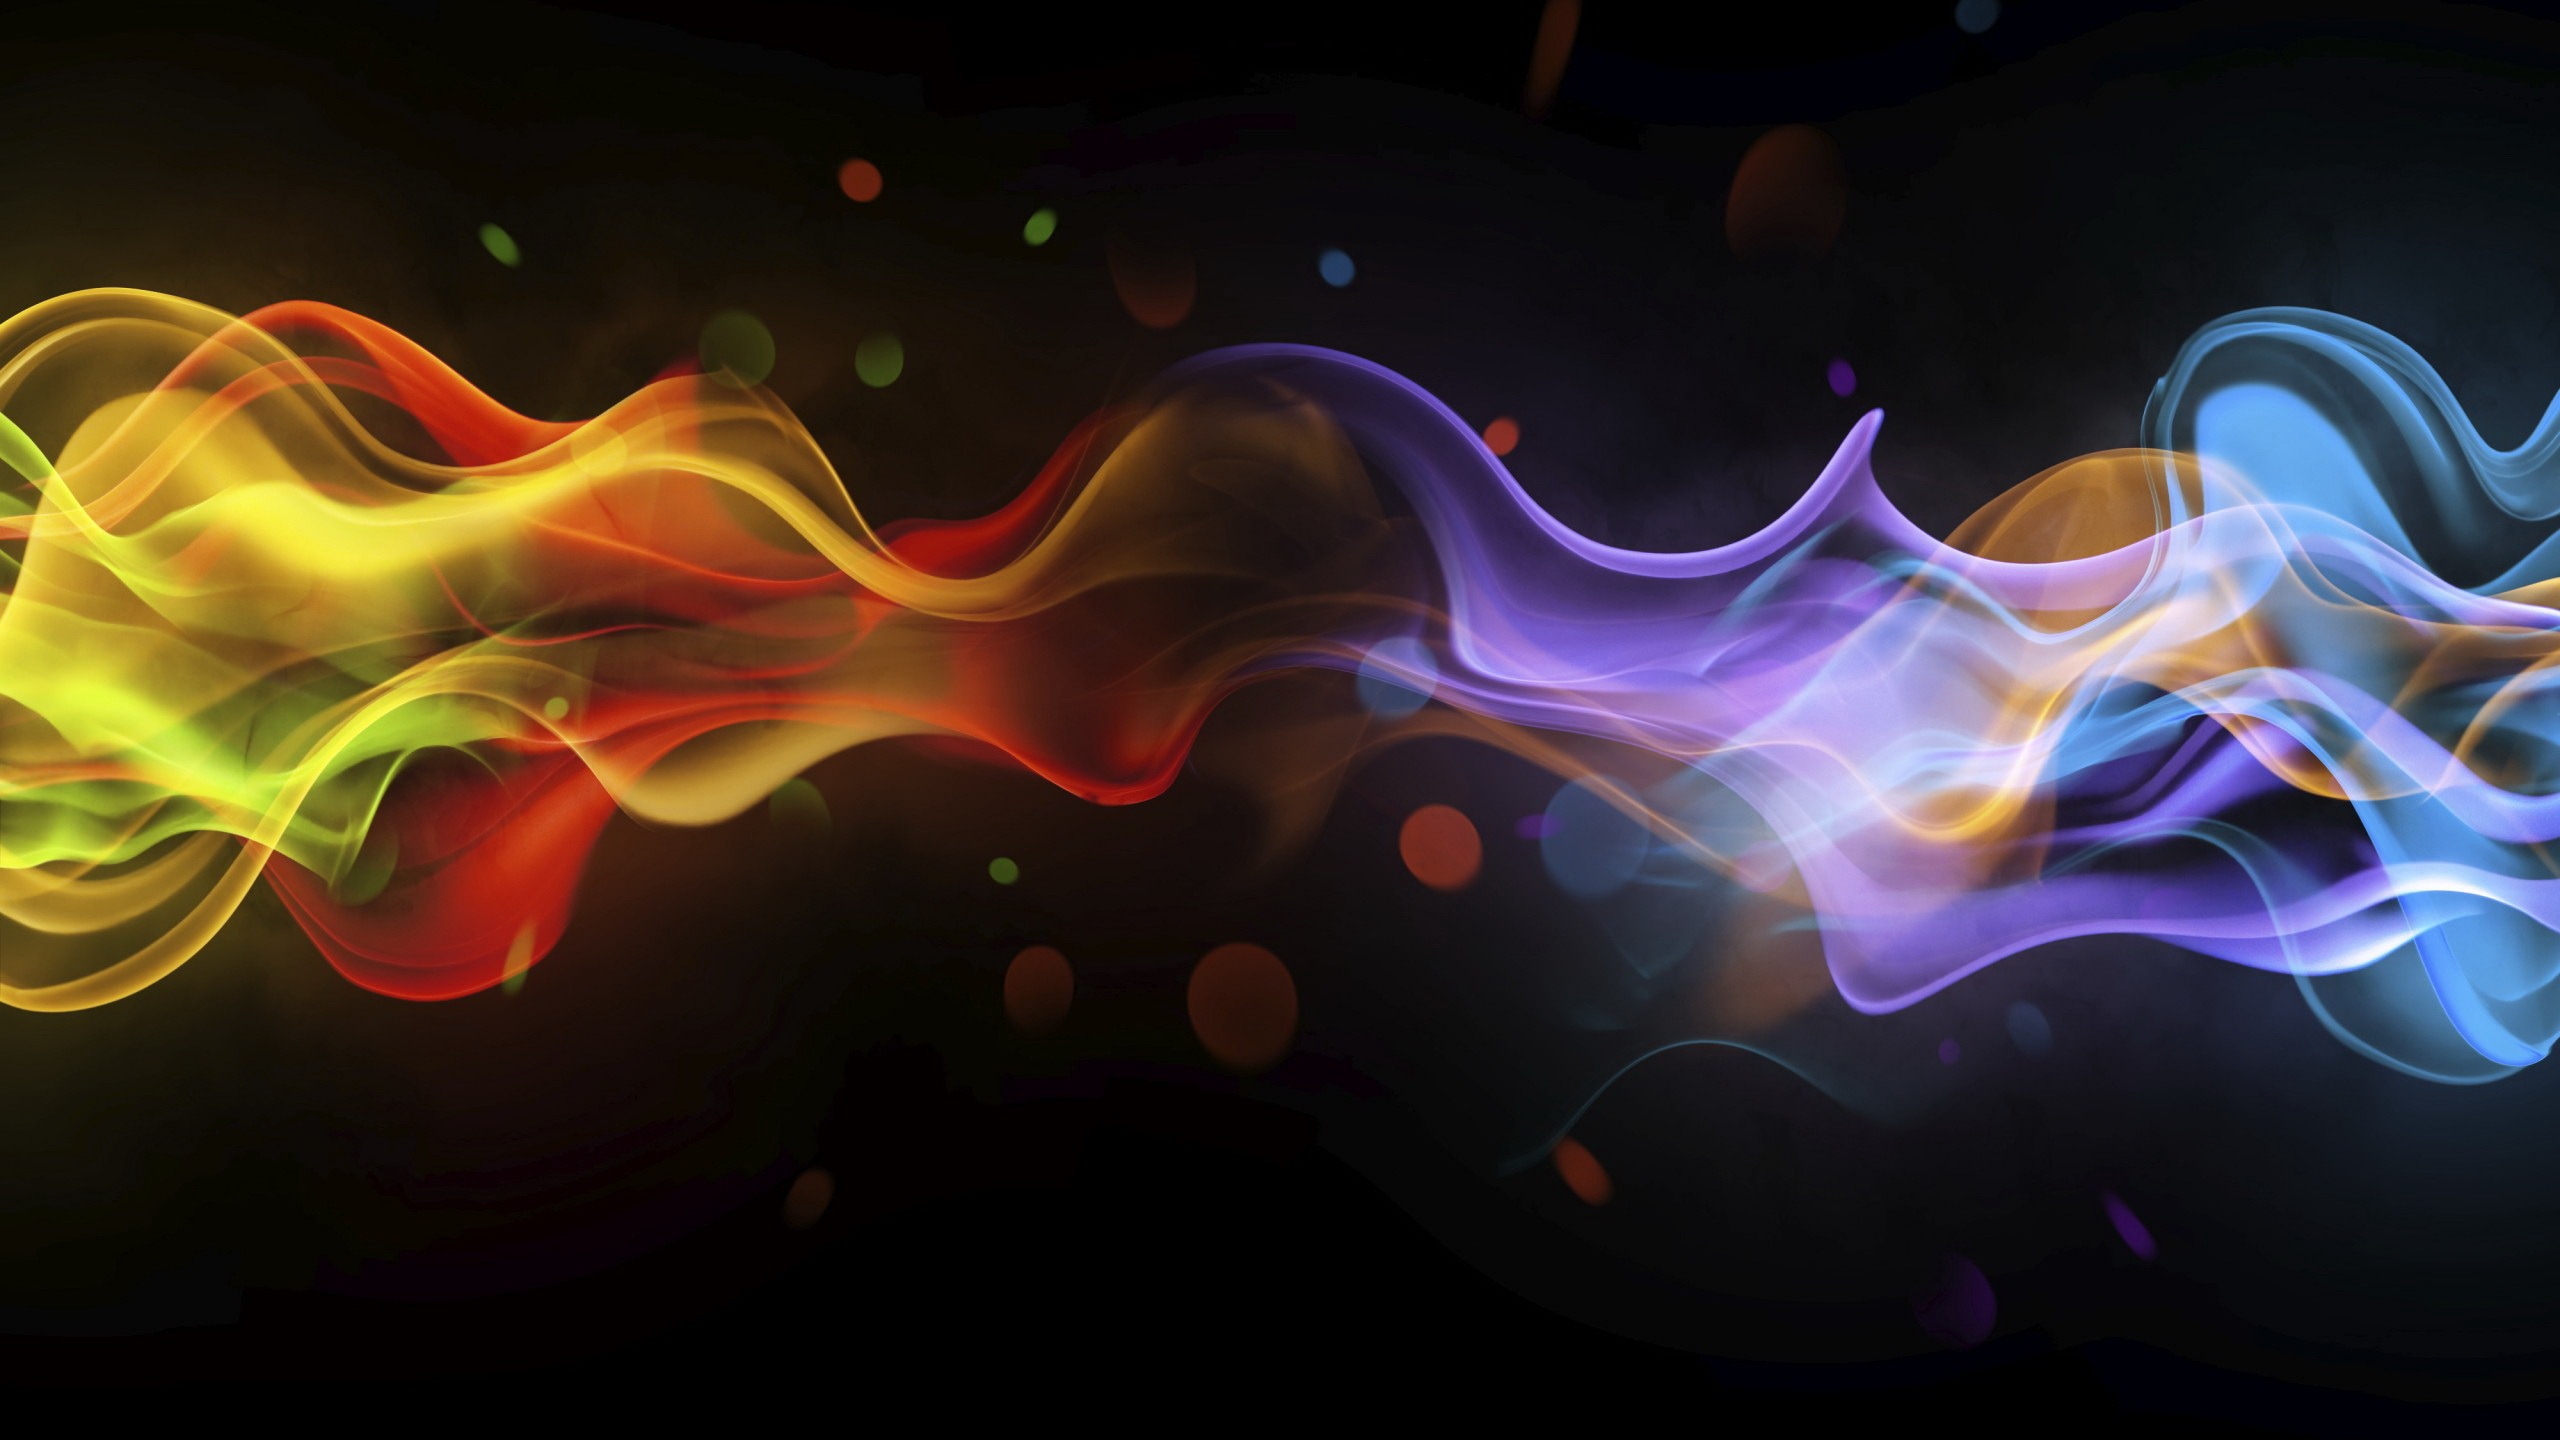 Colored Smoke for 2560x1440 HDTV resolution